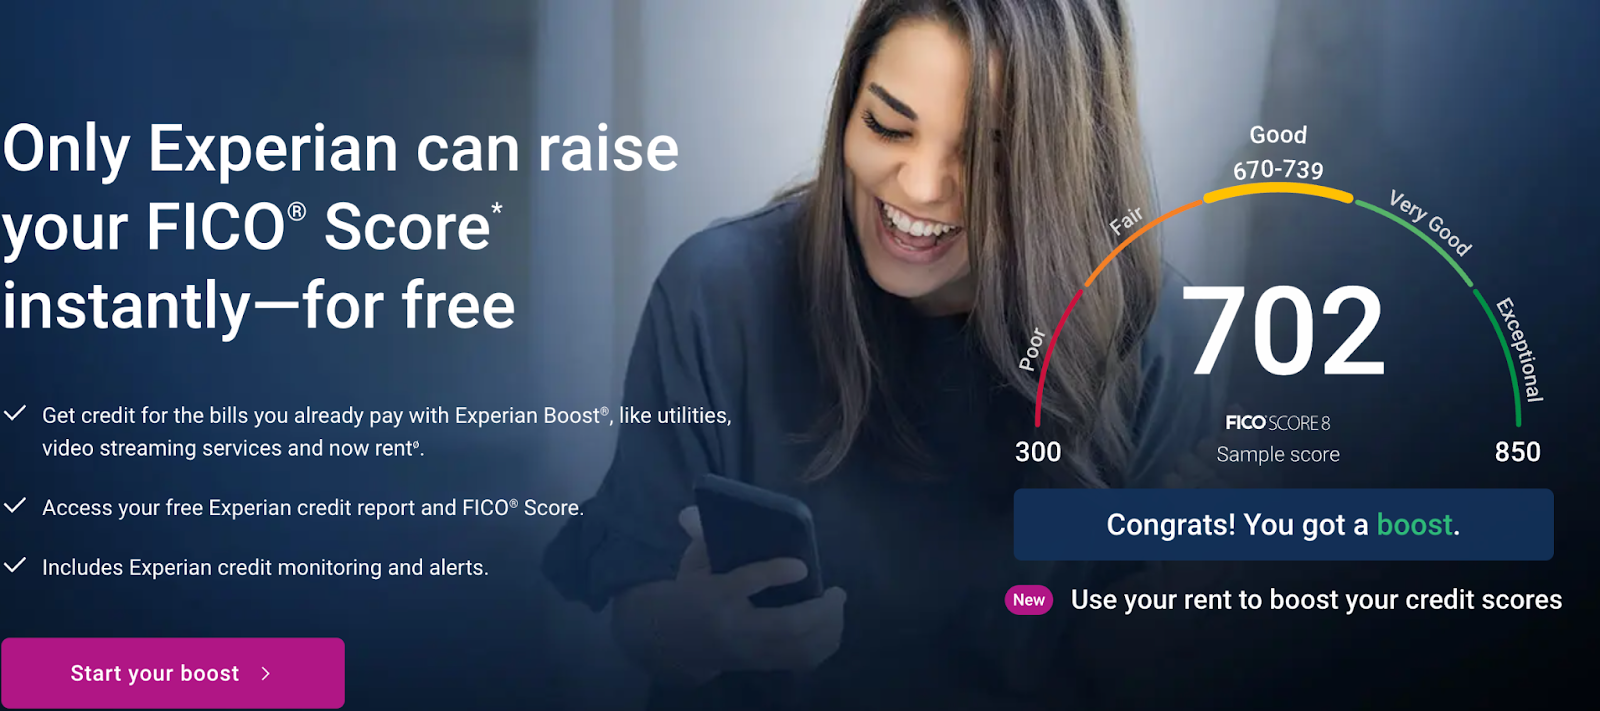 experian boost home page